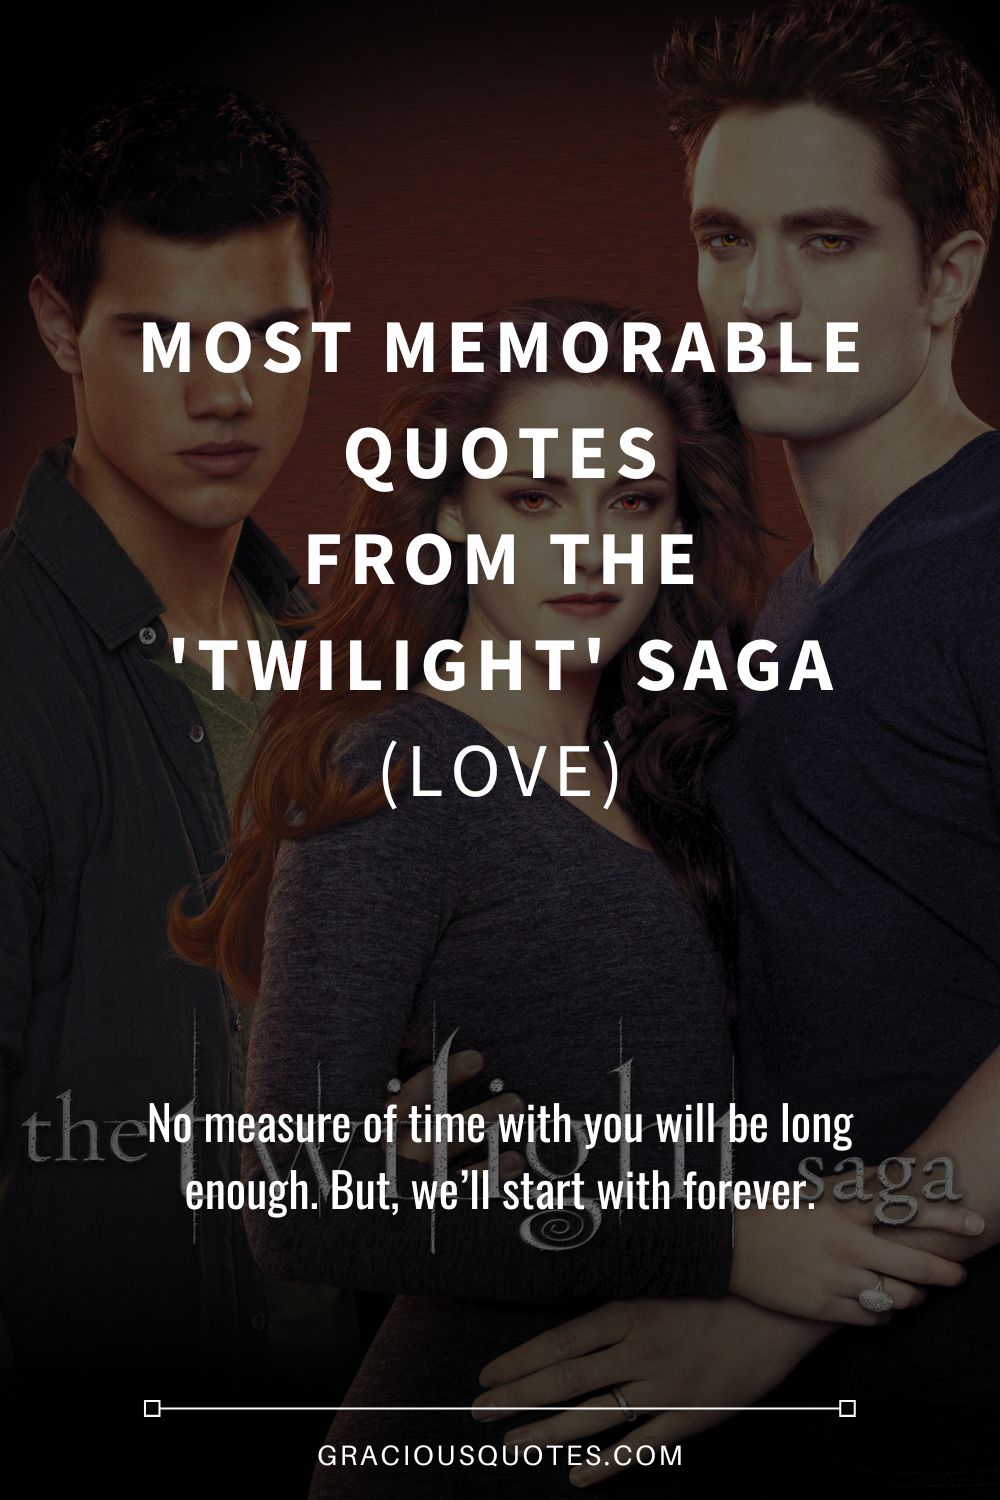 Most Memorable Quotes from the 'Twilight' Saga (LOVE) - Gracious Quotes